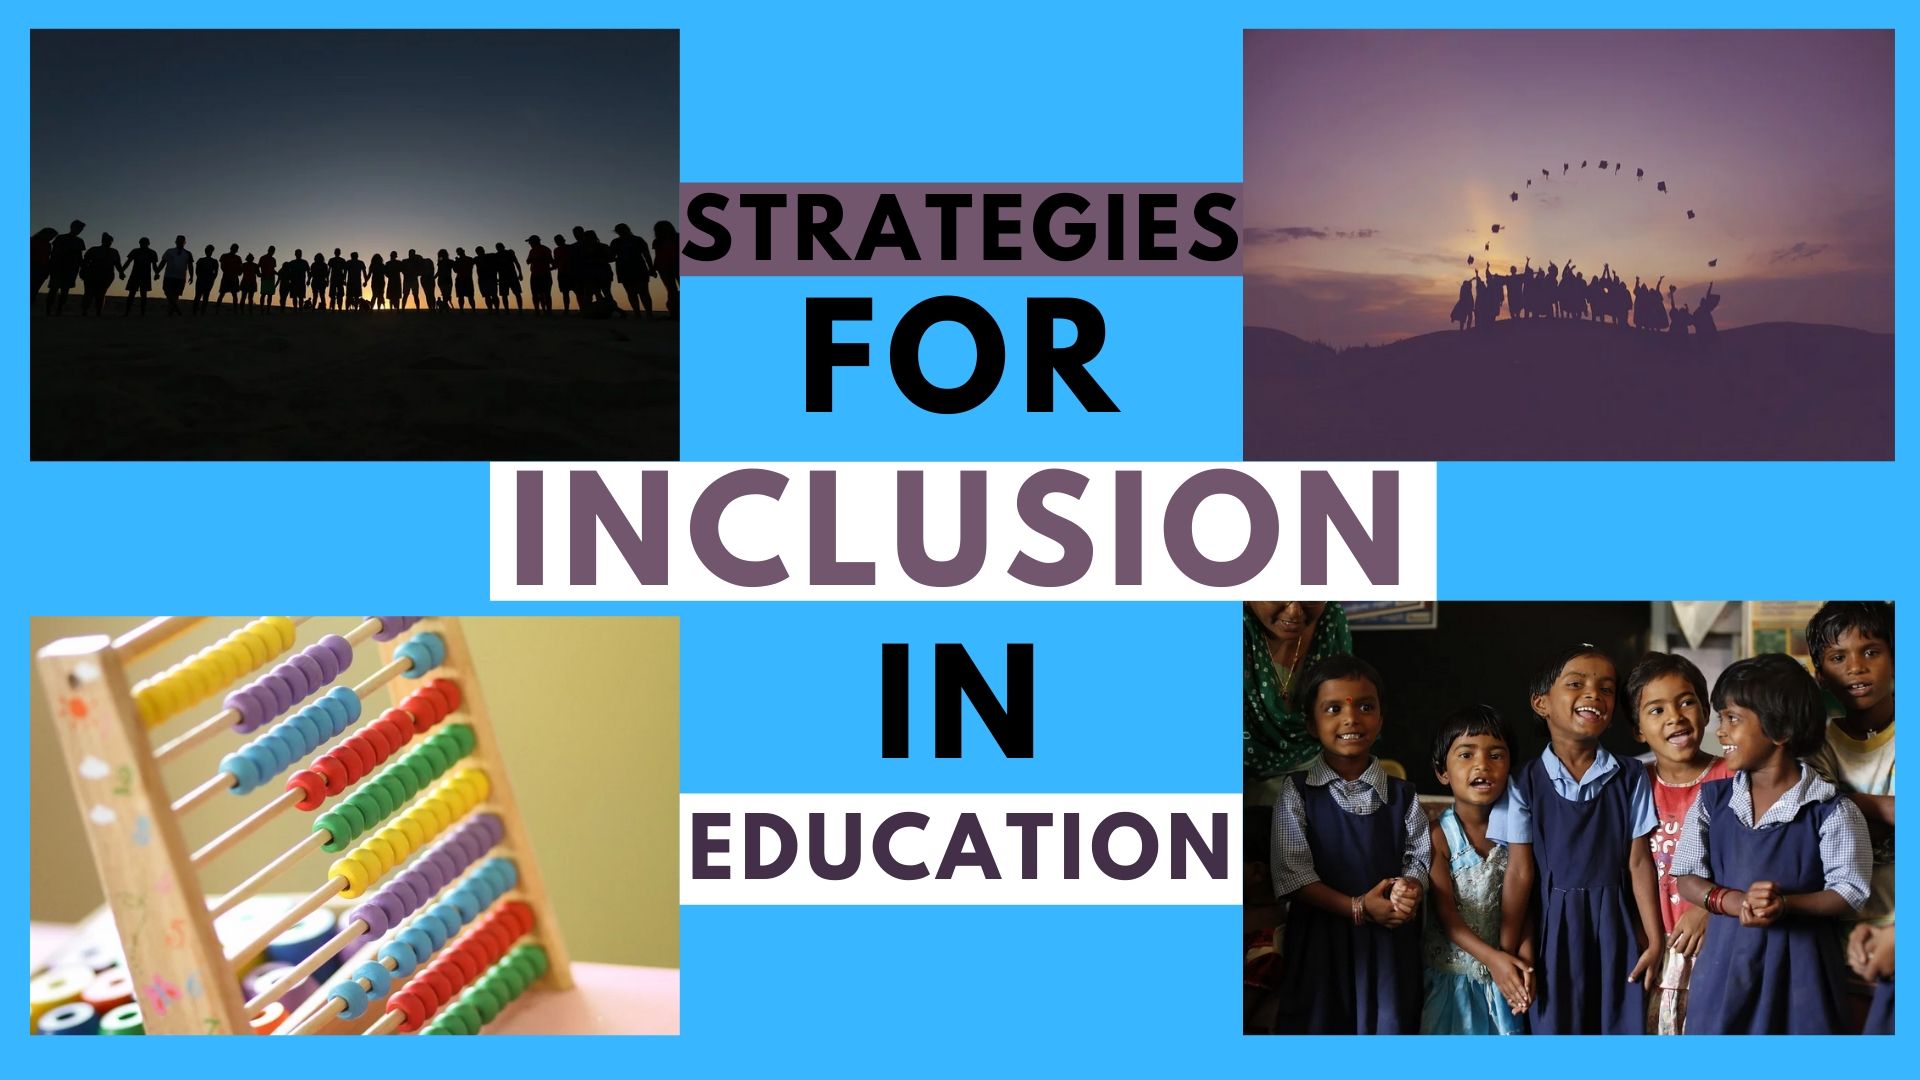 STRATEGIES FOR INCLUSIVE EDUCATION